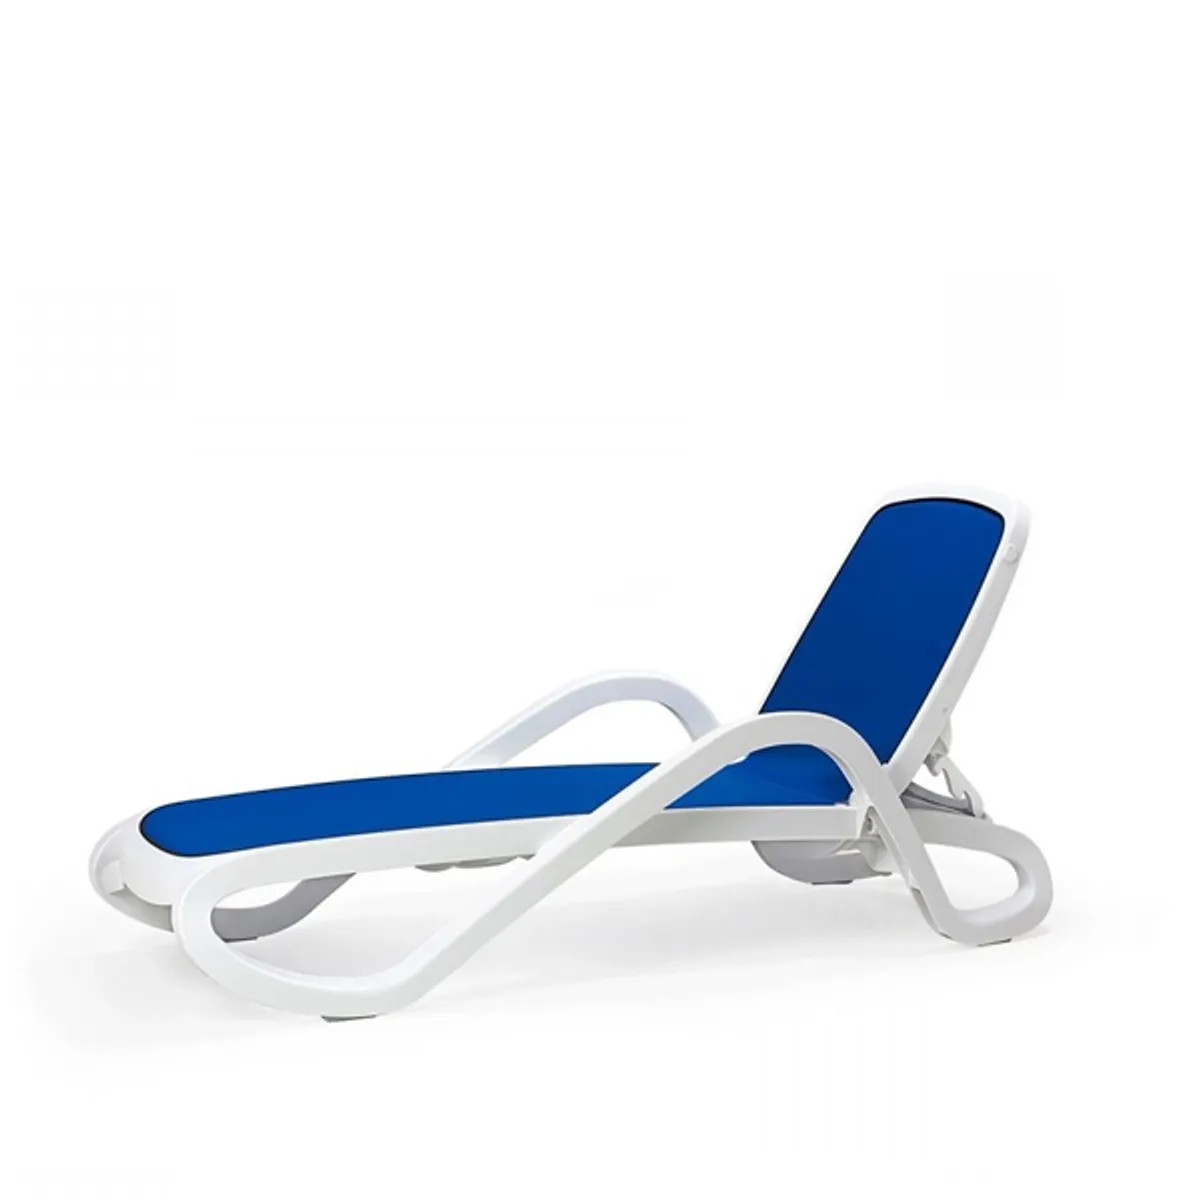 Alfa lounger with arms Inside Out Contracts7